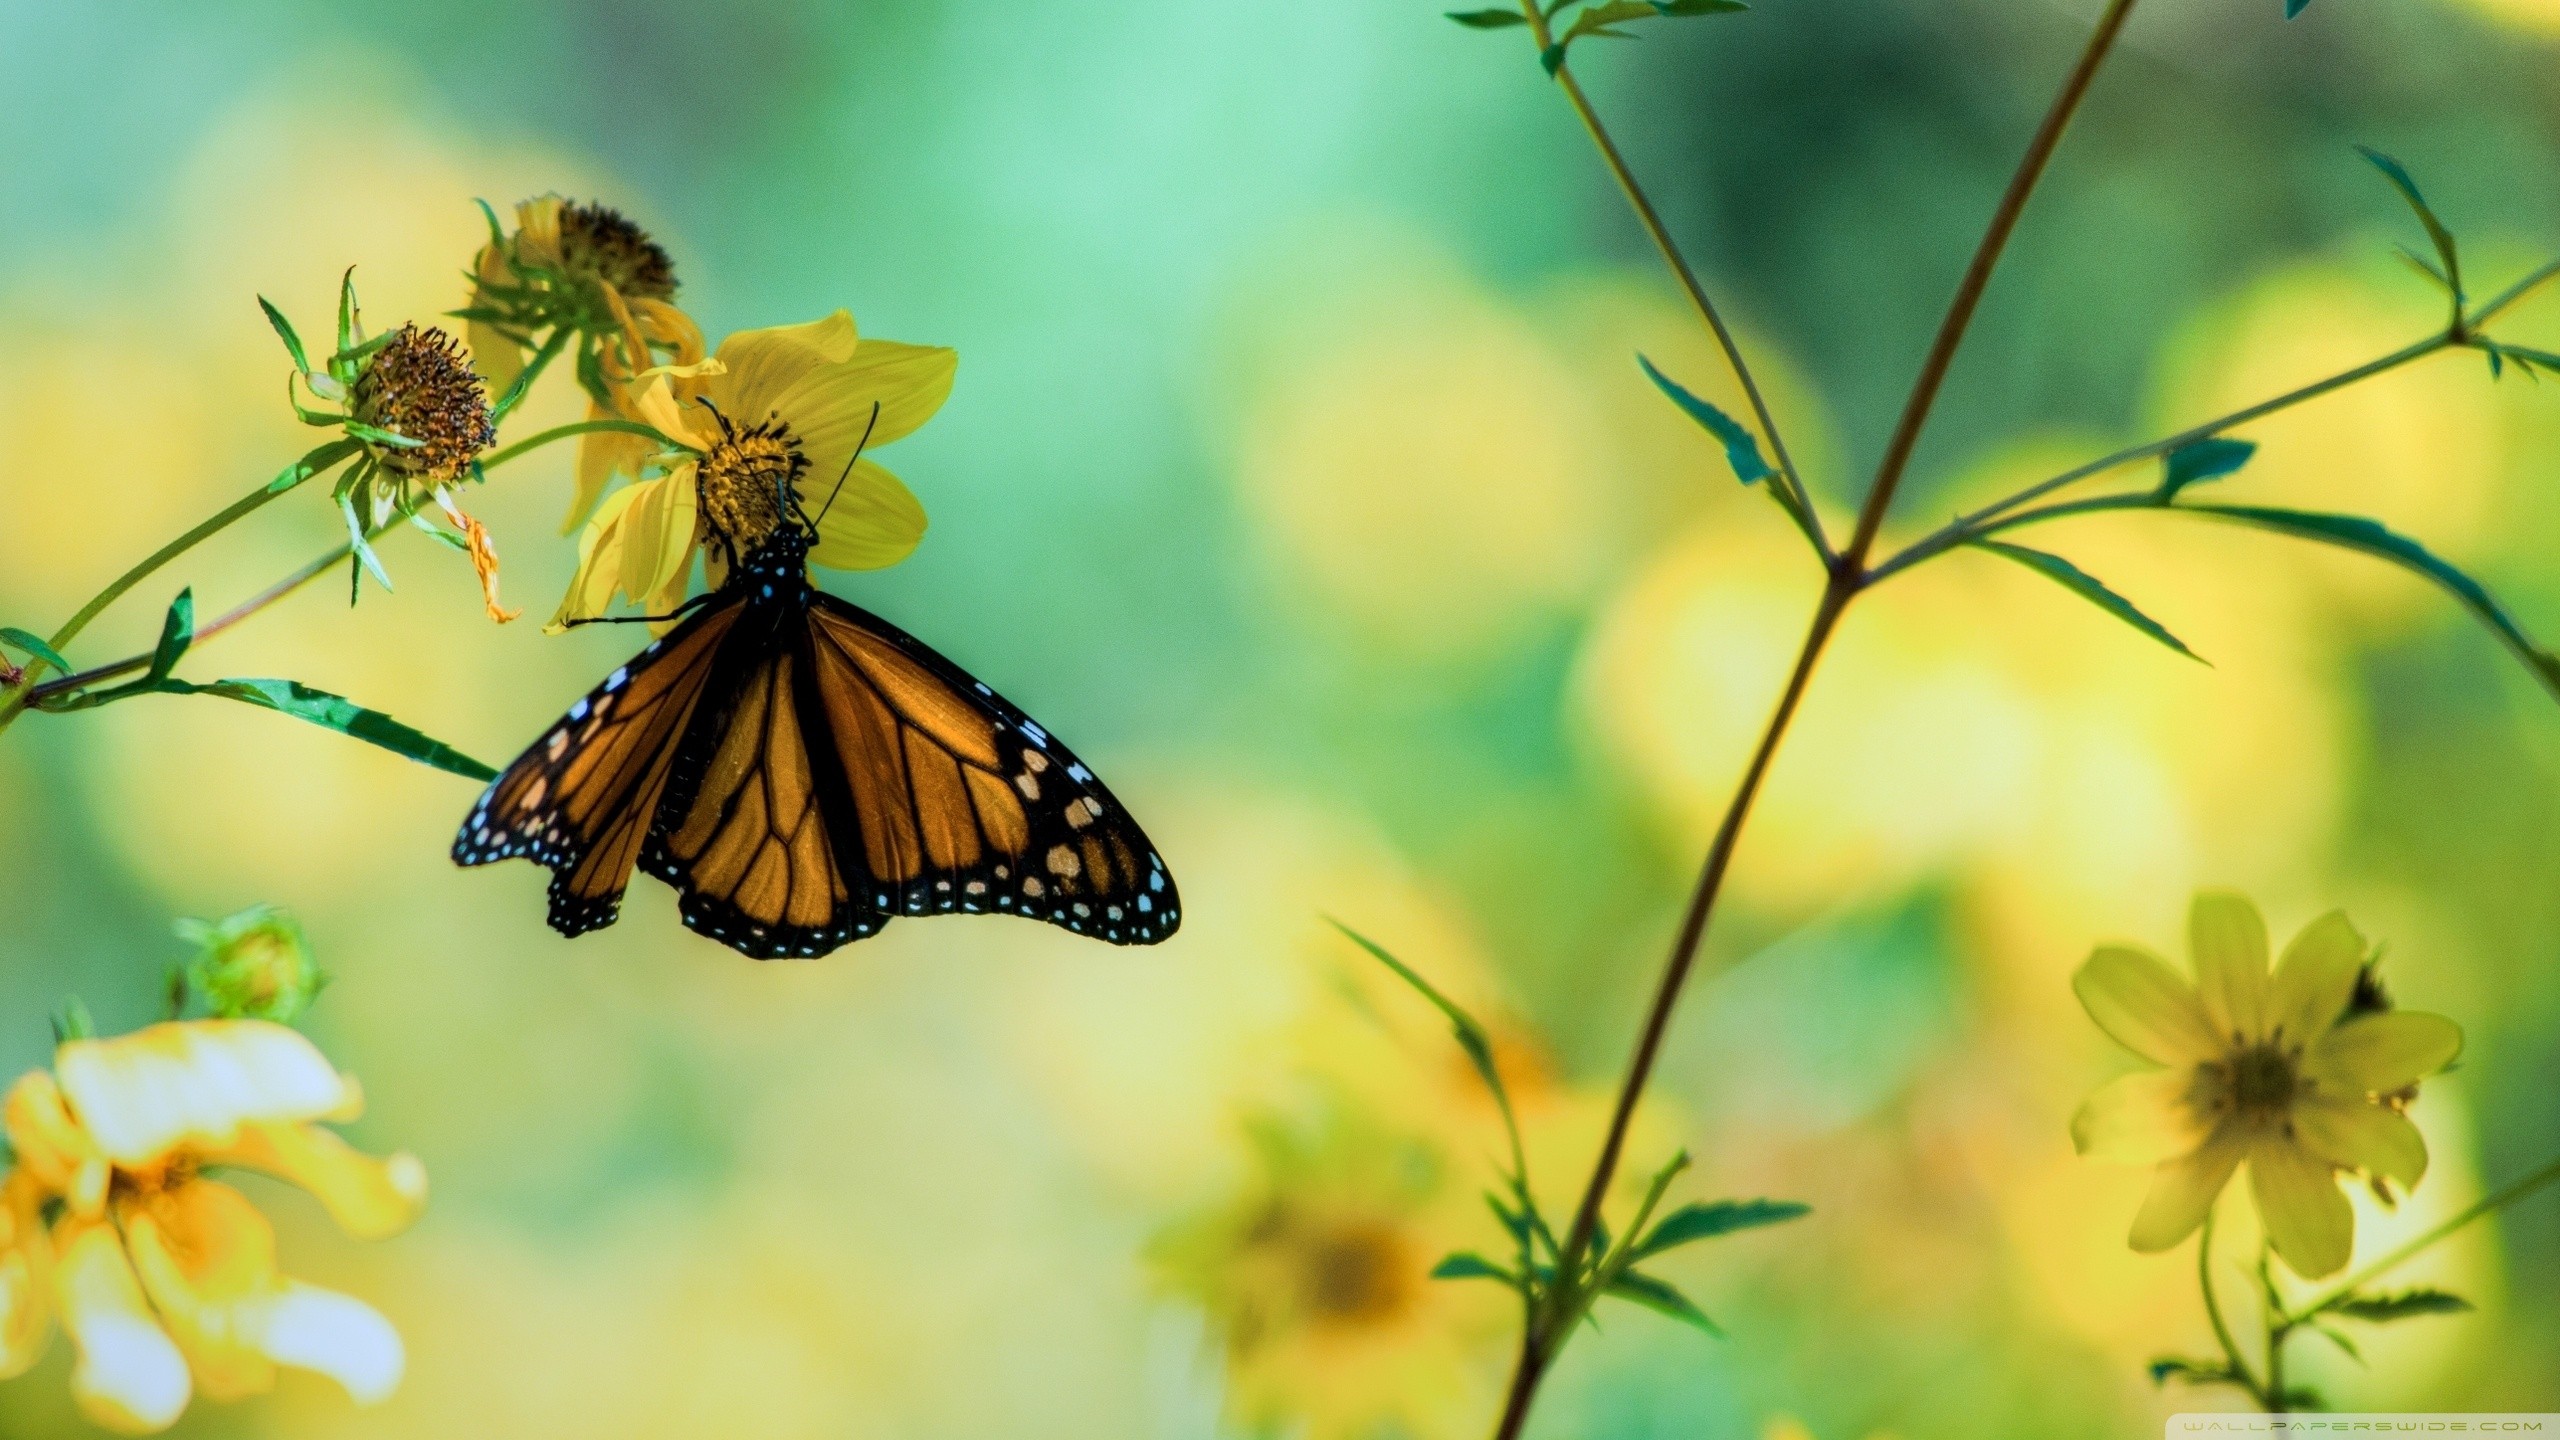 General 2560x1440 butterfly flowers insect animals plants